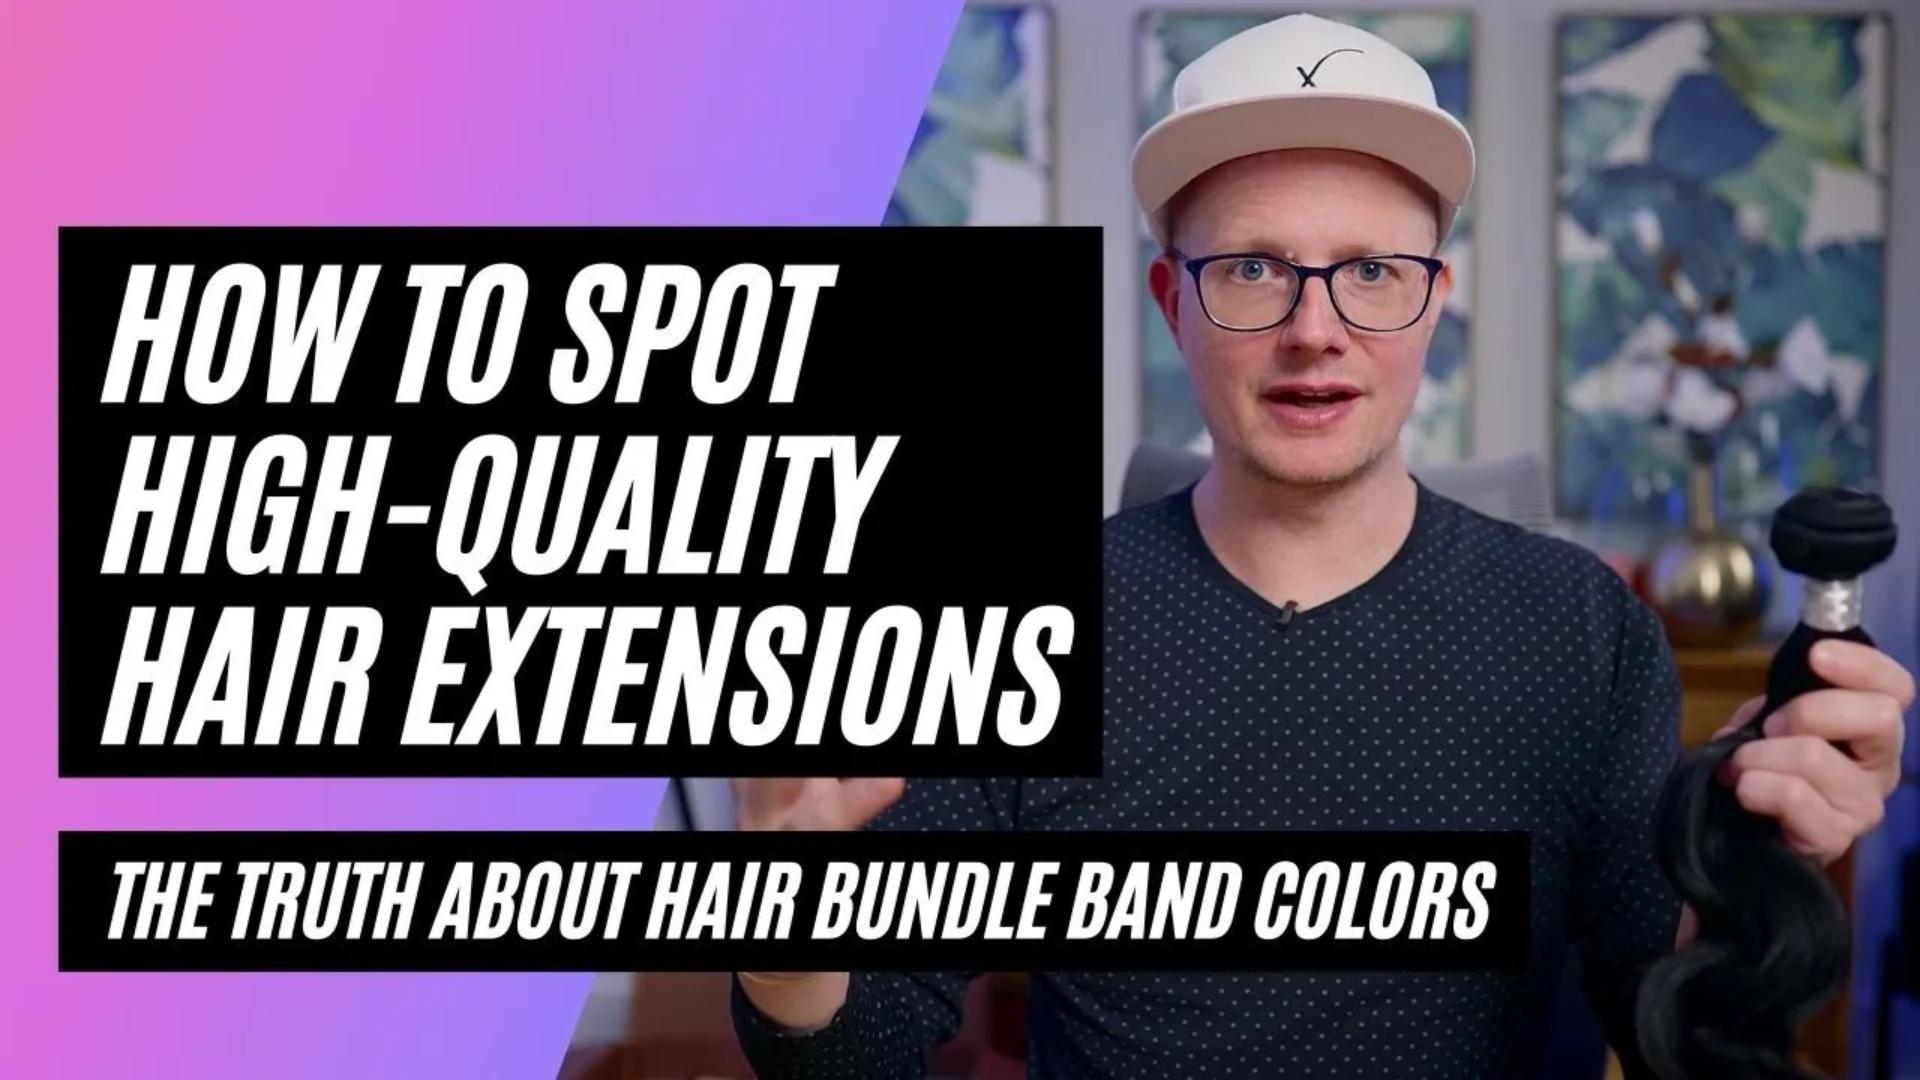 The truth about Hair Bundle Band Colors